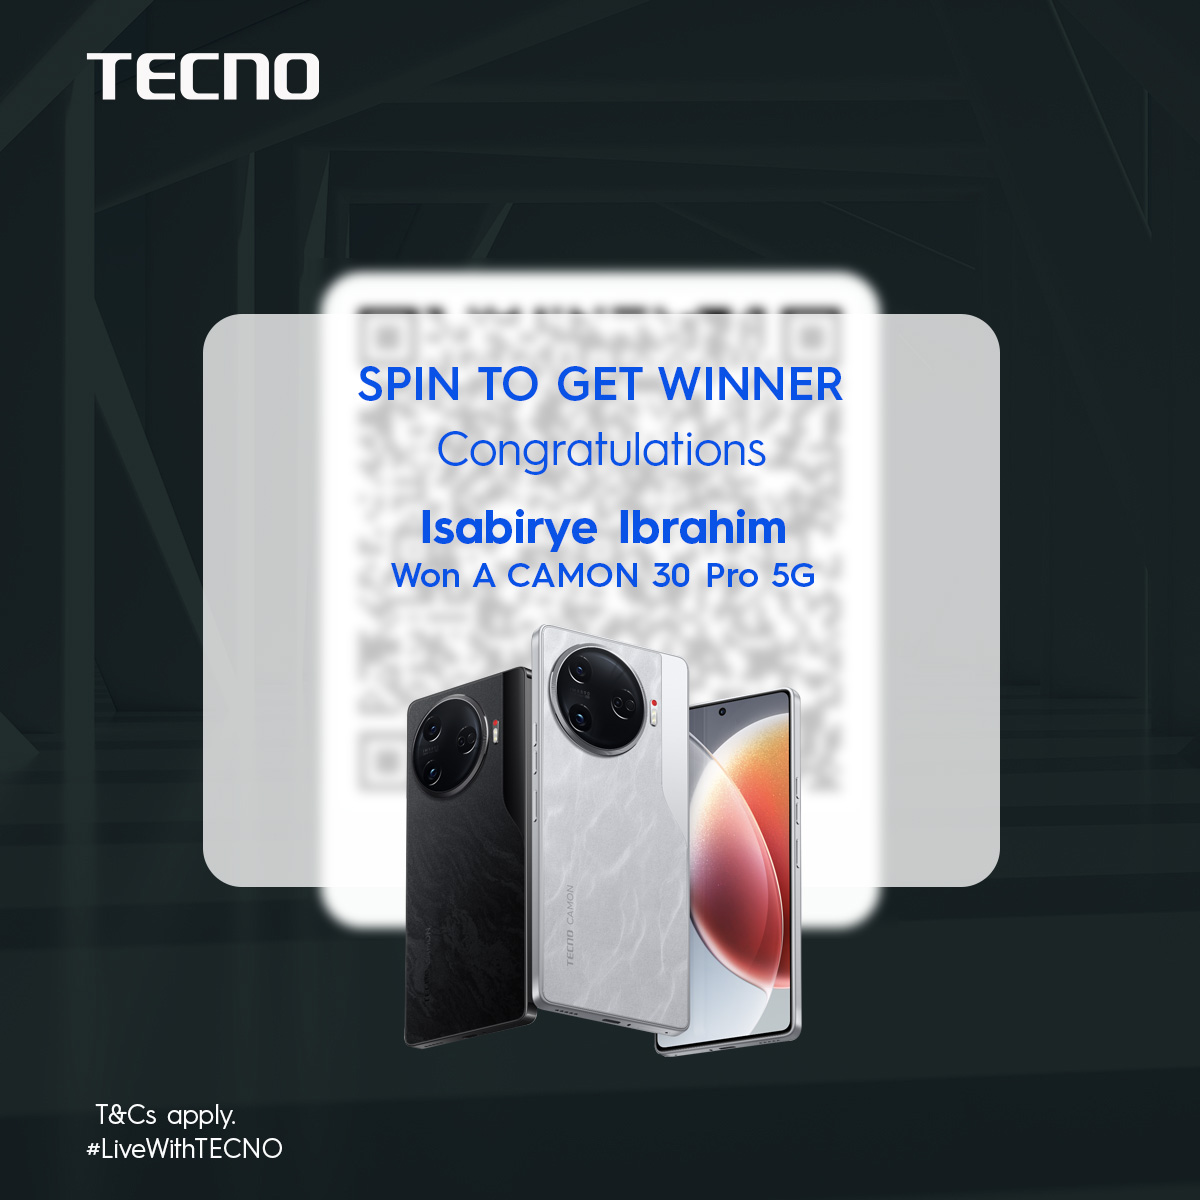 Congratulations to @ibra_tman, the lucky winner of a CAMON 30 PRO 5G from our Spin to Win contest! Enjoy your new device to the fullest! #CAMON30SERIES #CAMON30AIPhone #SpinToWin